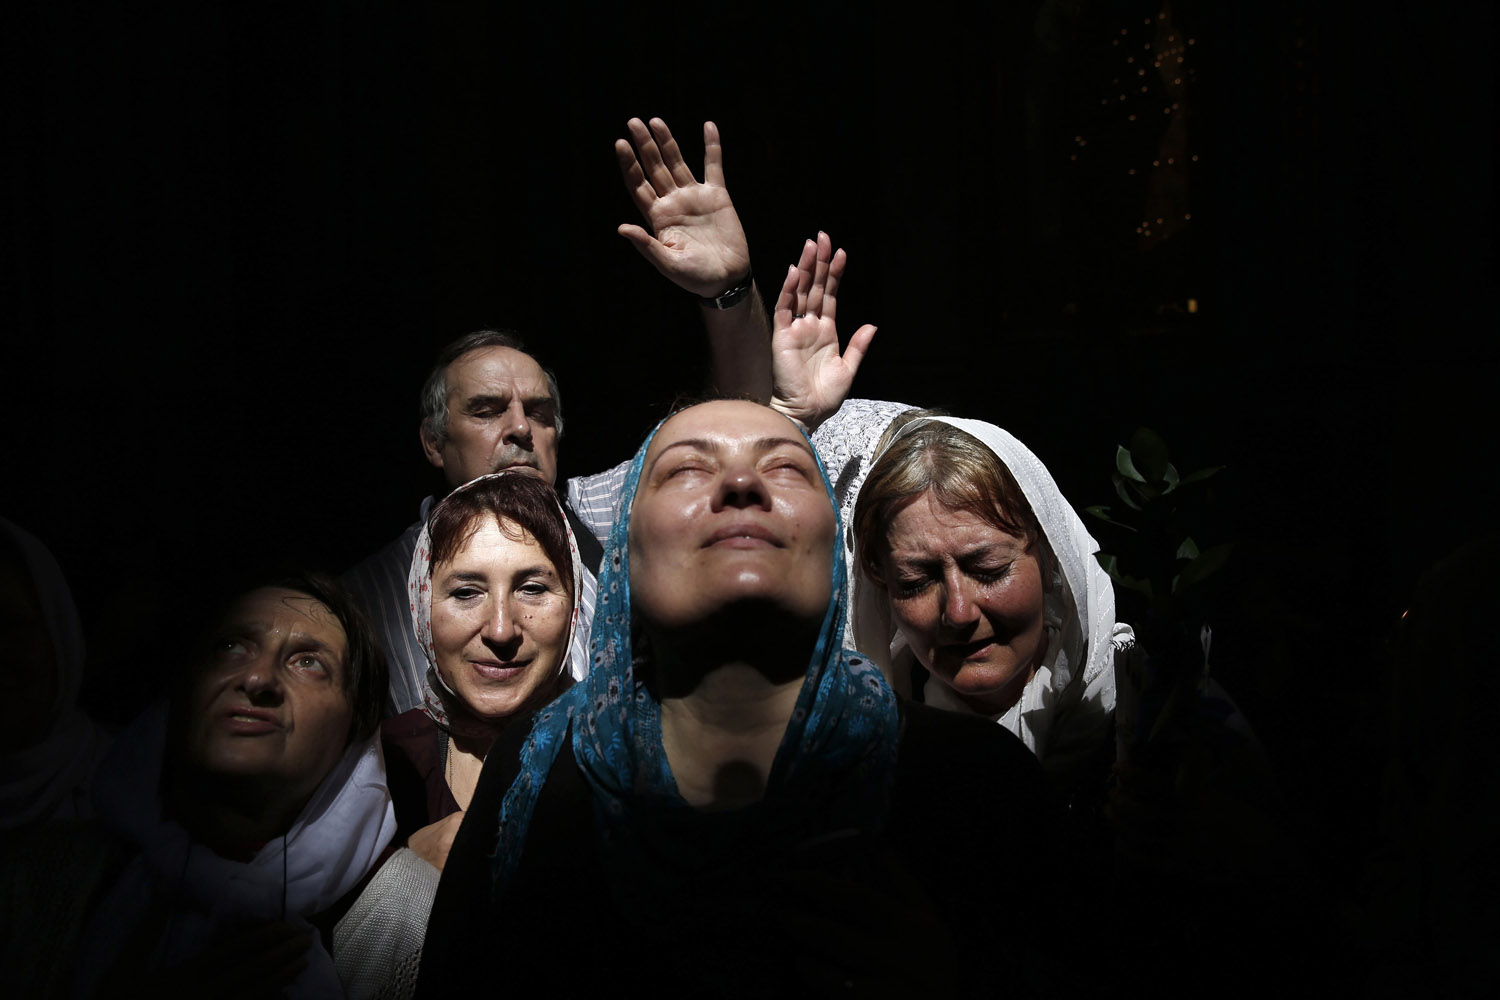 Worshippers react to a beam of sunlight as they take part in the Christian Orthodox Holy Fire ceremony at the Church of the Holy Sepulchre in Jerusalem's Old City